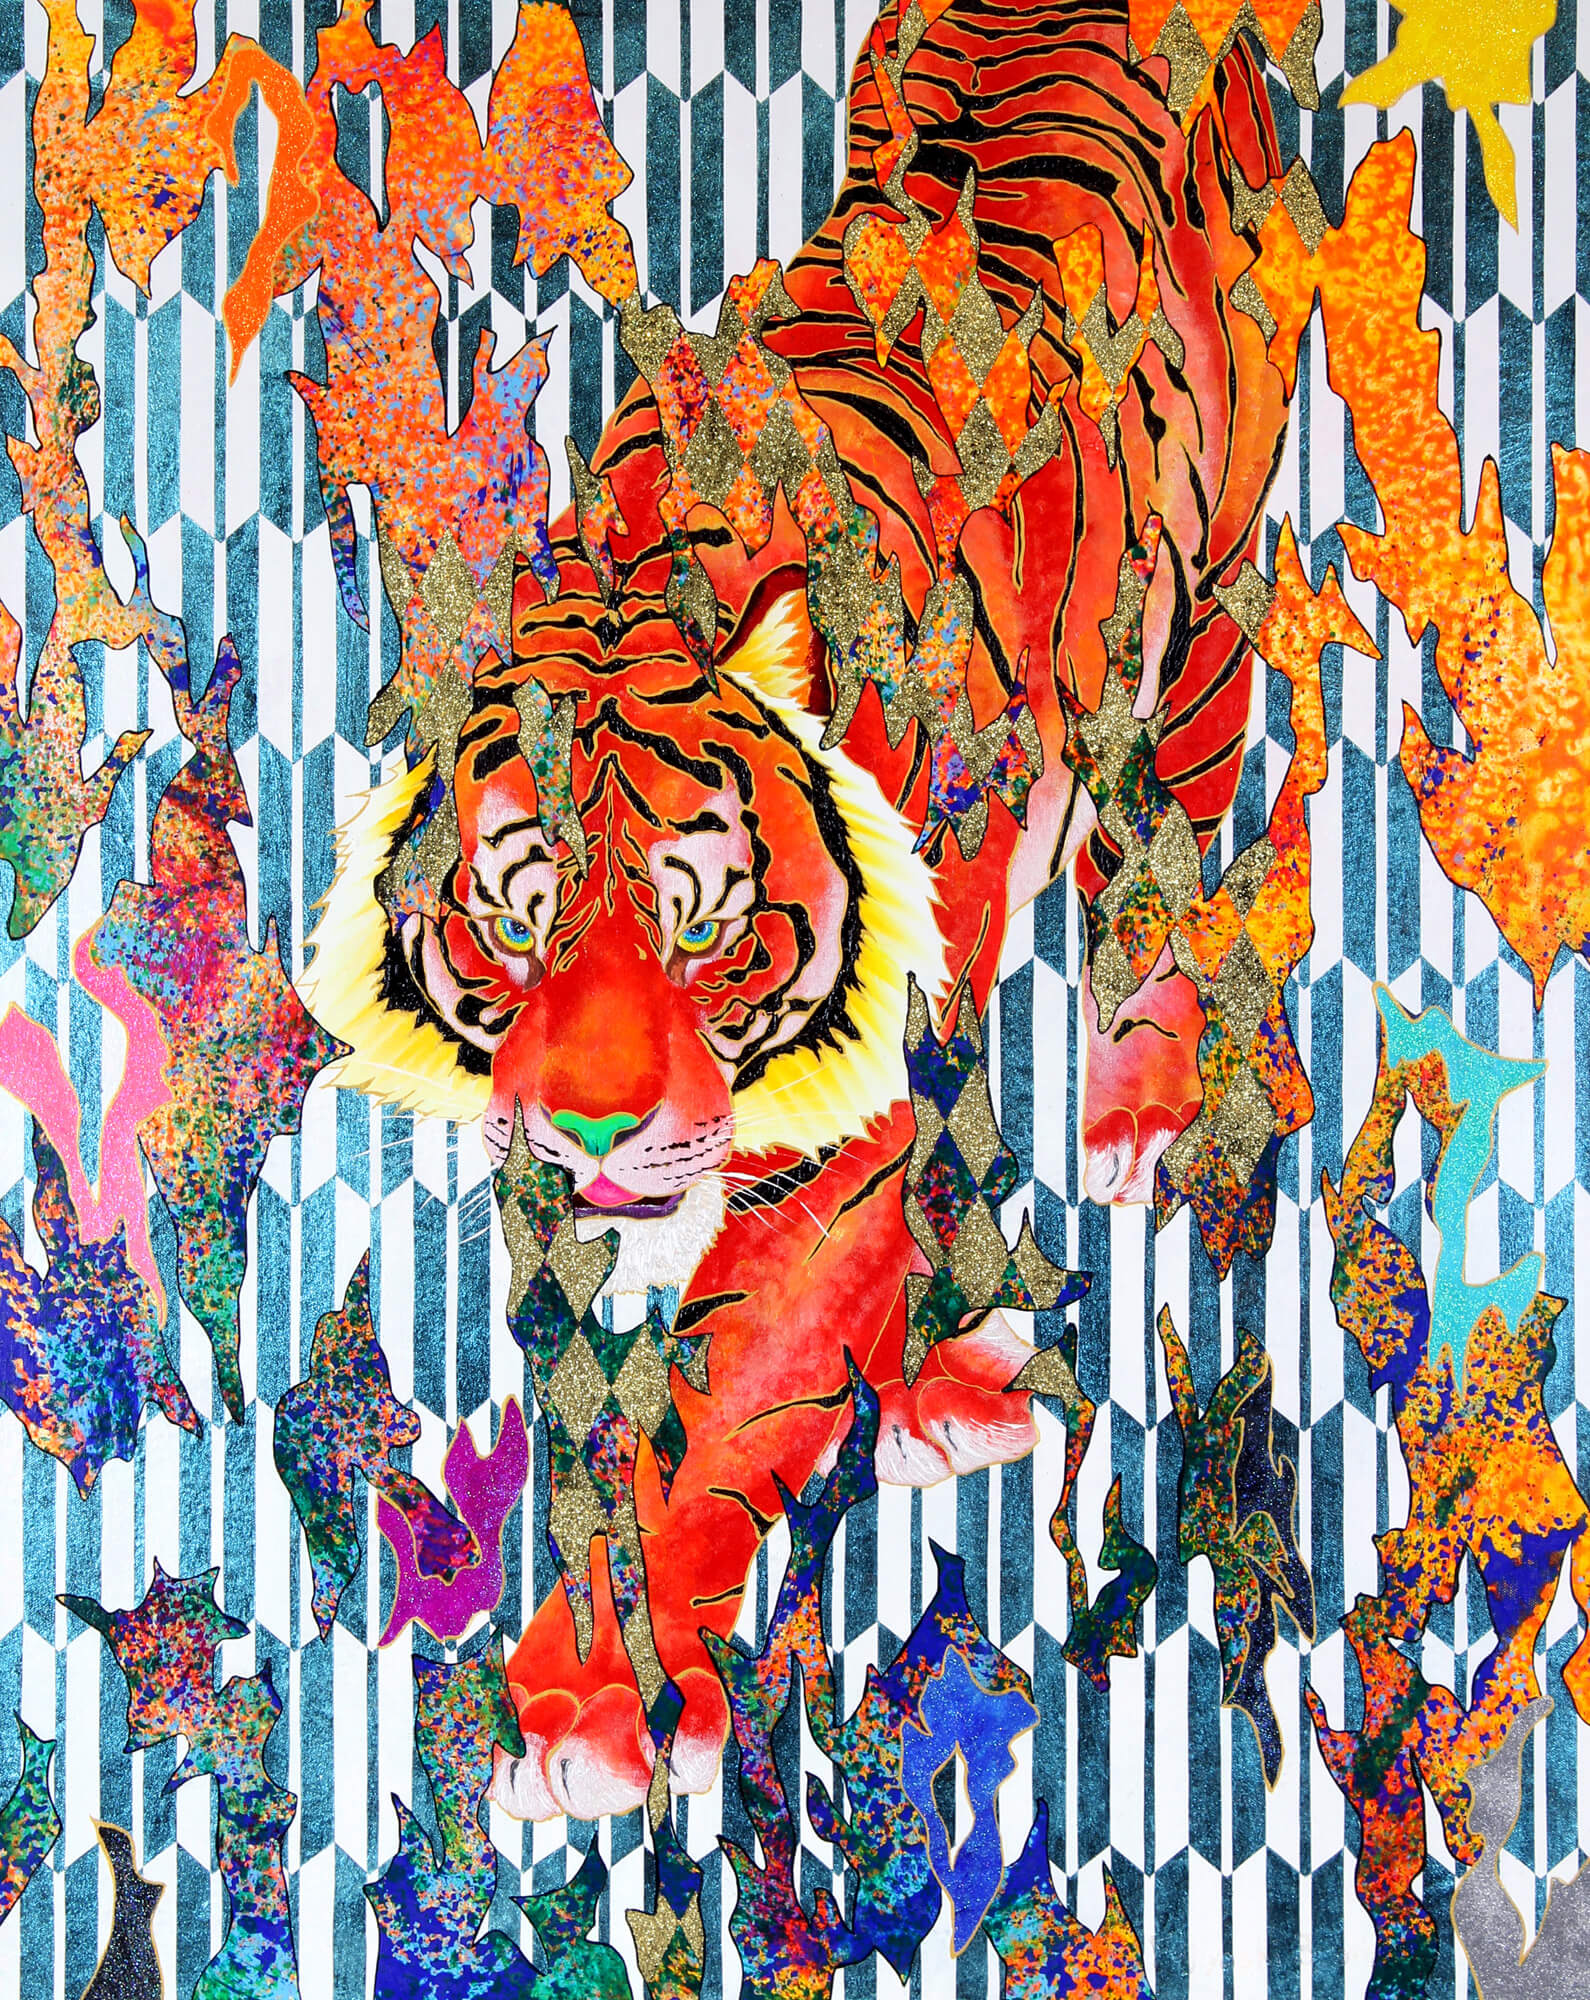 See-through：Scarlet Tiger改行
Acrylic and glitter on canvas, 910×727mm, 2019